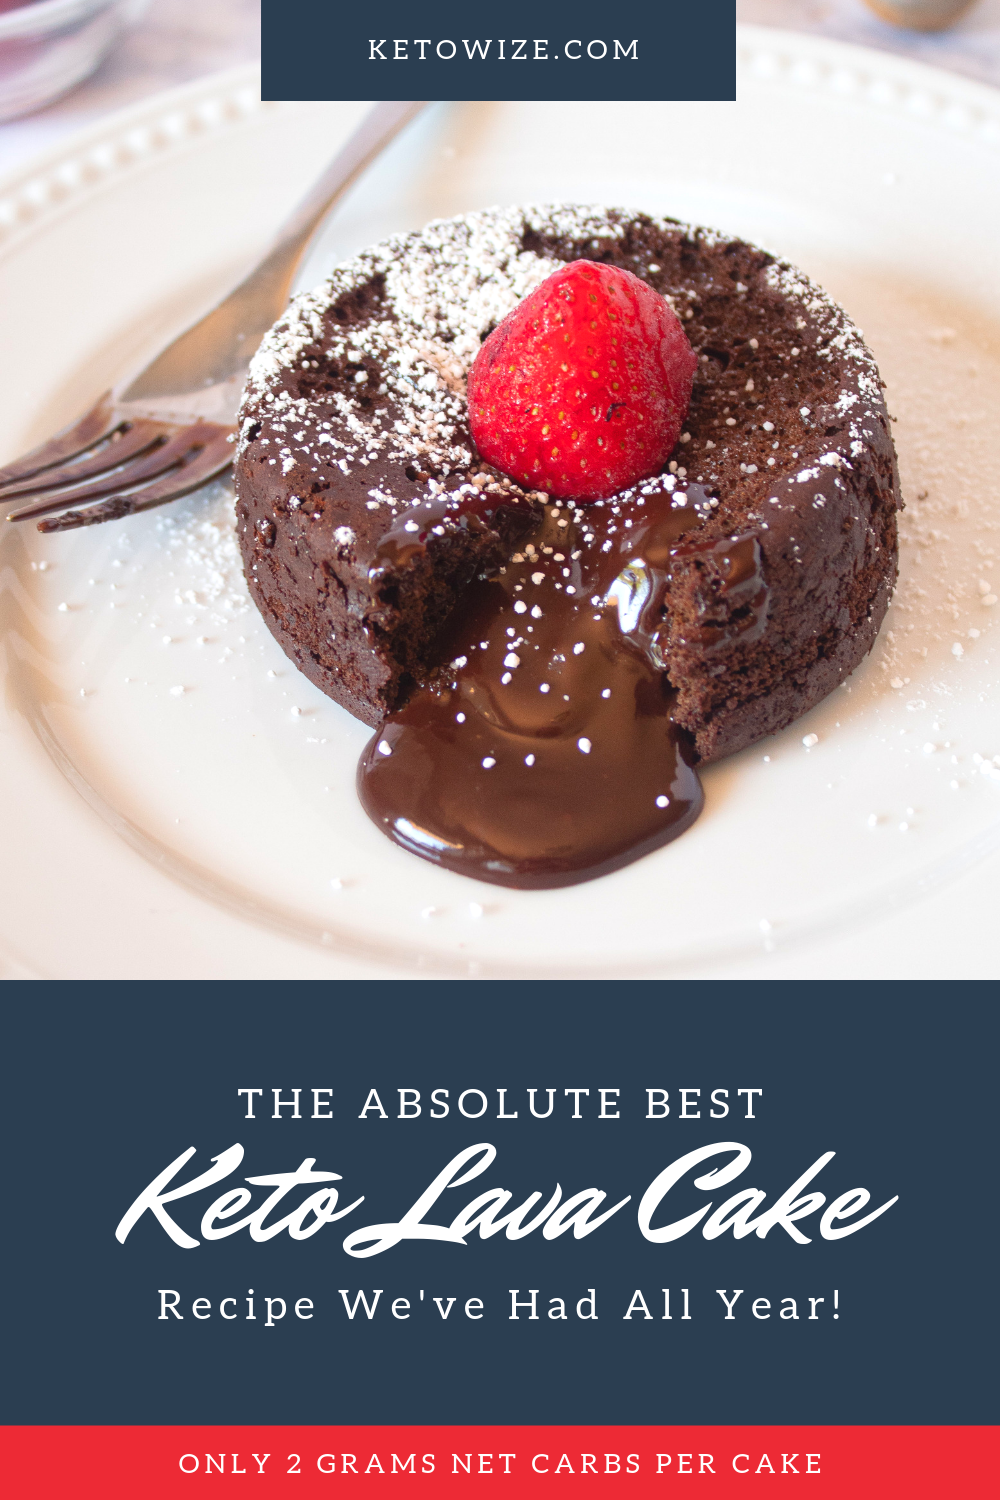 This Keto Lava Cake Recipe Is The Best We\'ve Had All Year